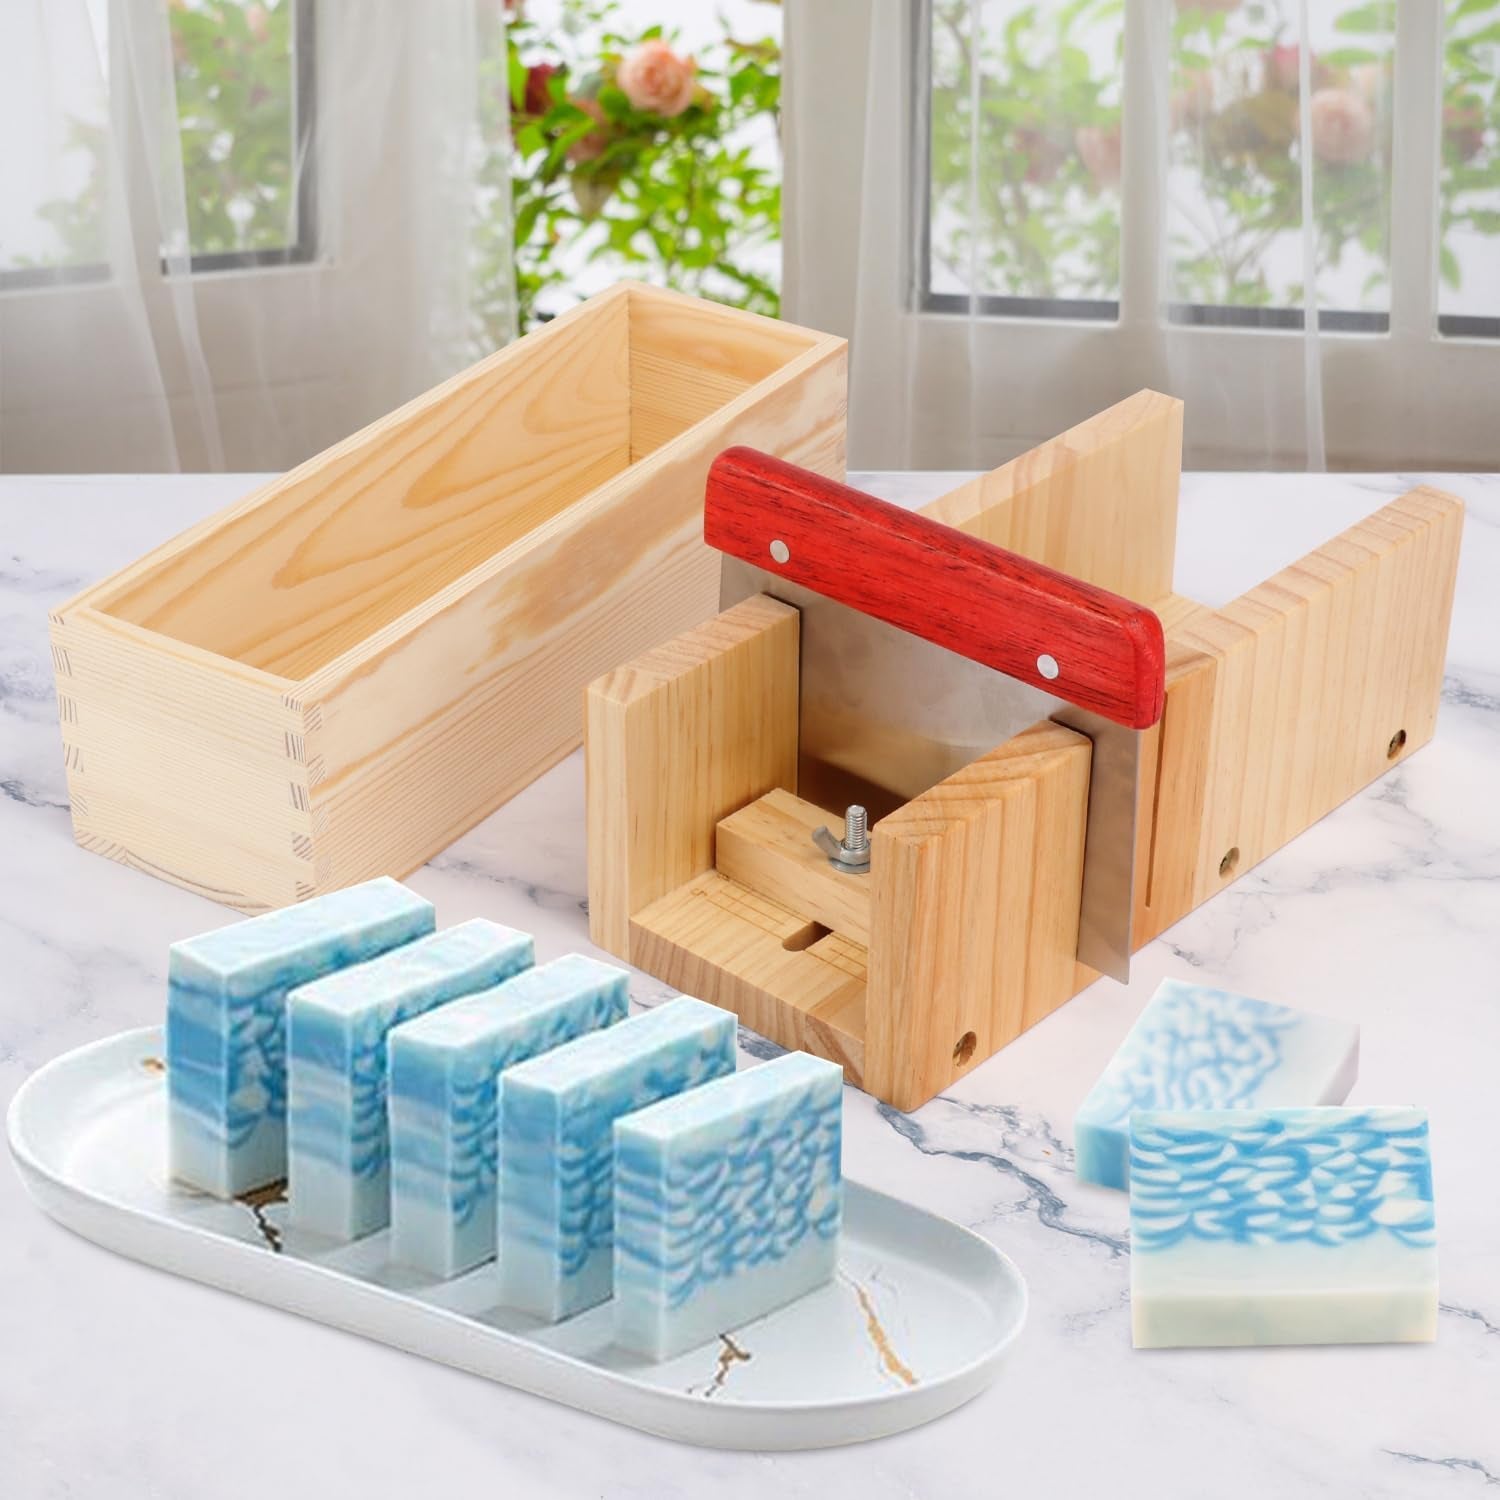 Premium Soap Making Kit with 3PCS 42Oz Silicone Moldss & Wooden Box & Two Cutter, Complete Crafting Set for Pour or Cold Process Soap, by